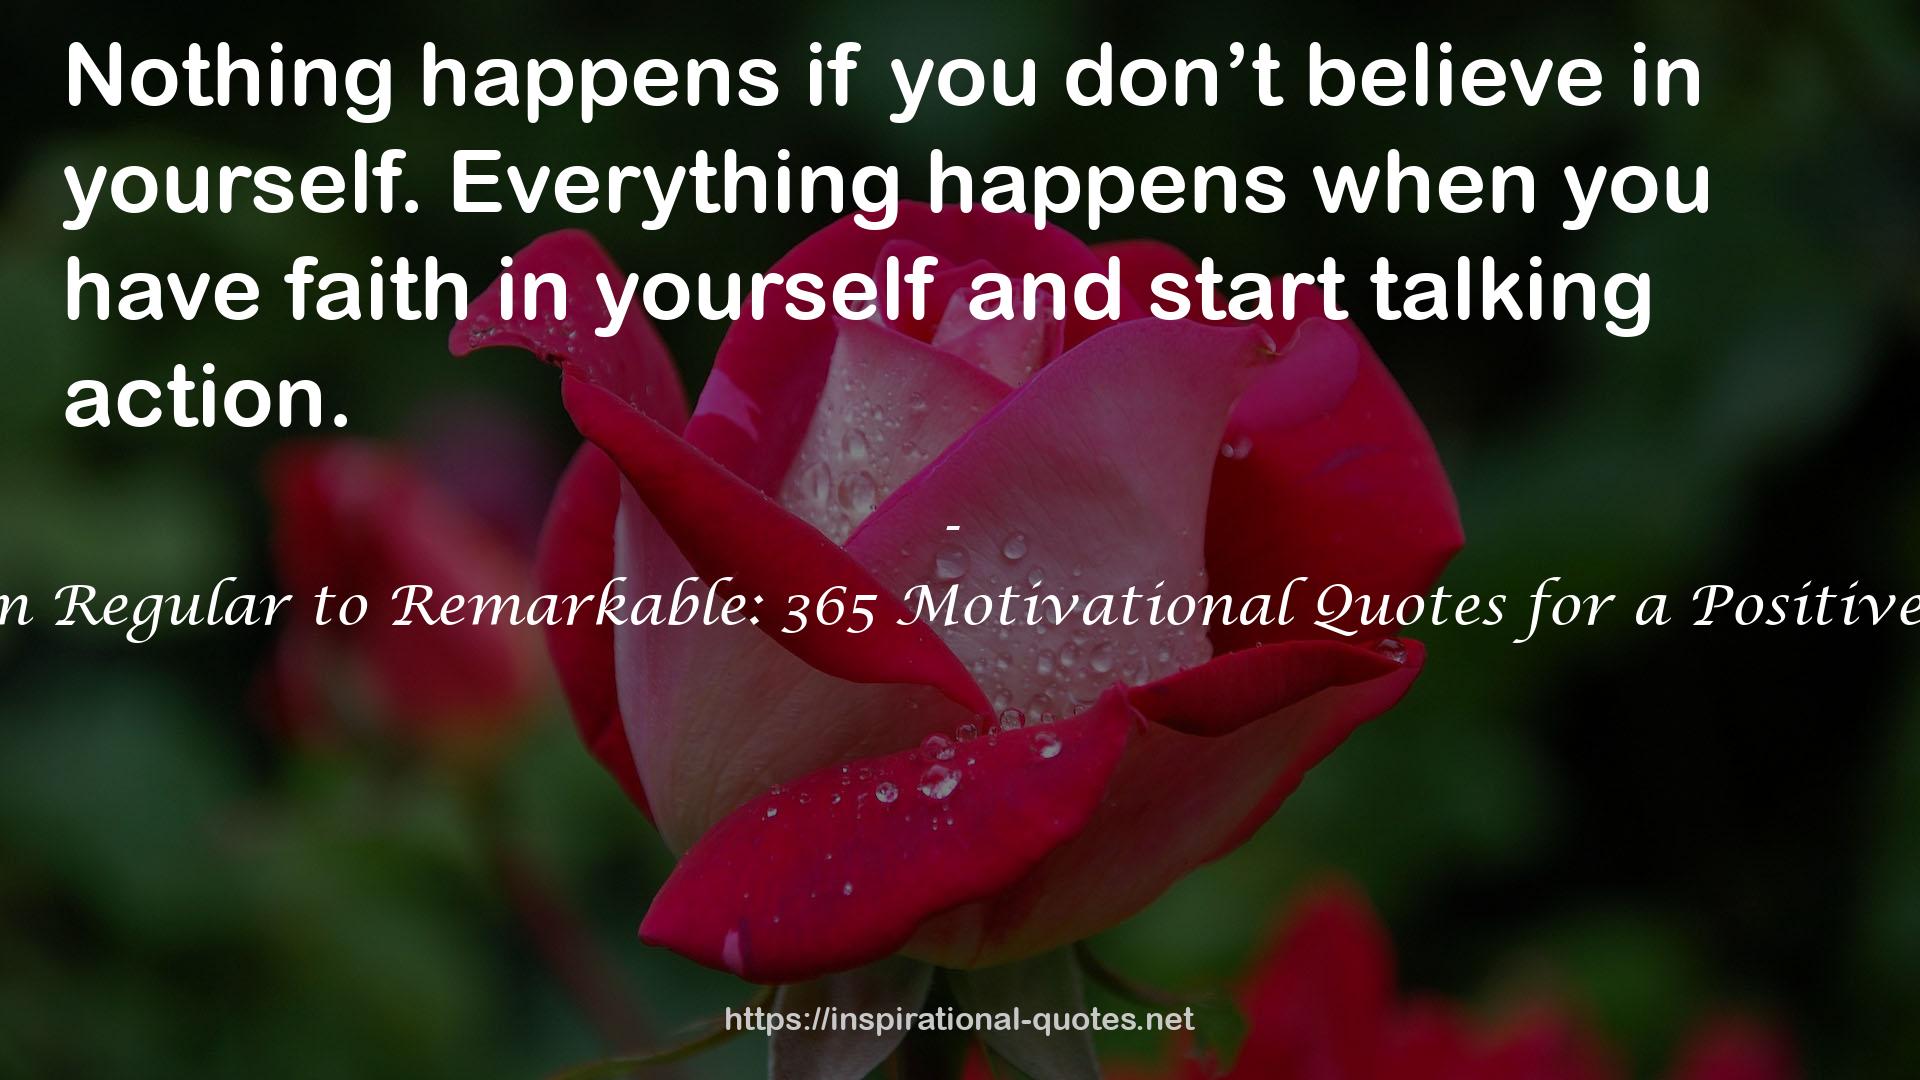 From Regular to Remarkable: 365 Motivational Quotes for a Positive Life QUOTES